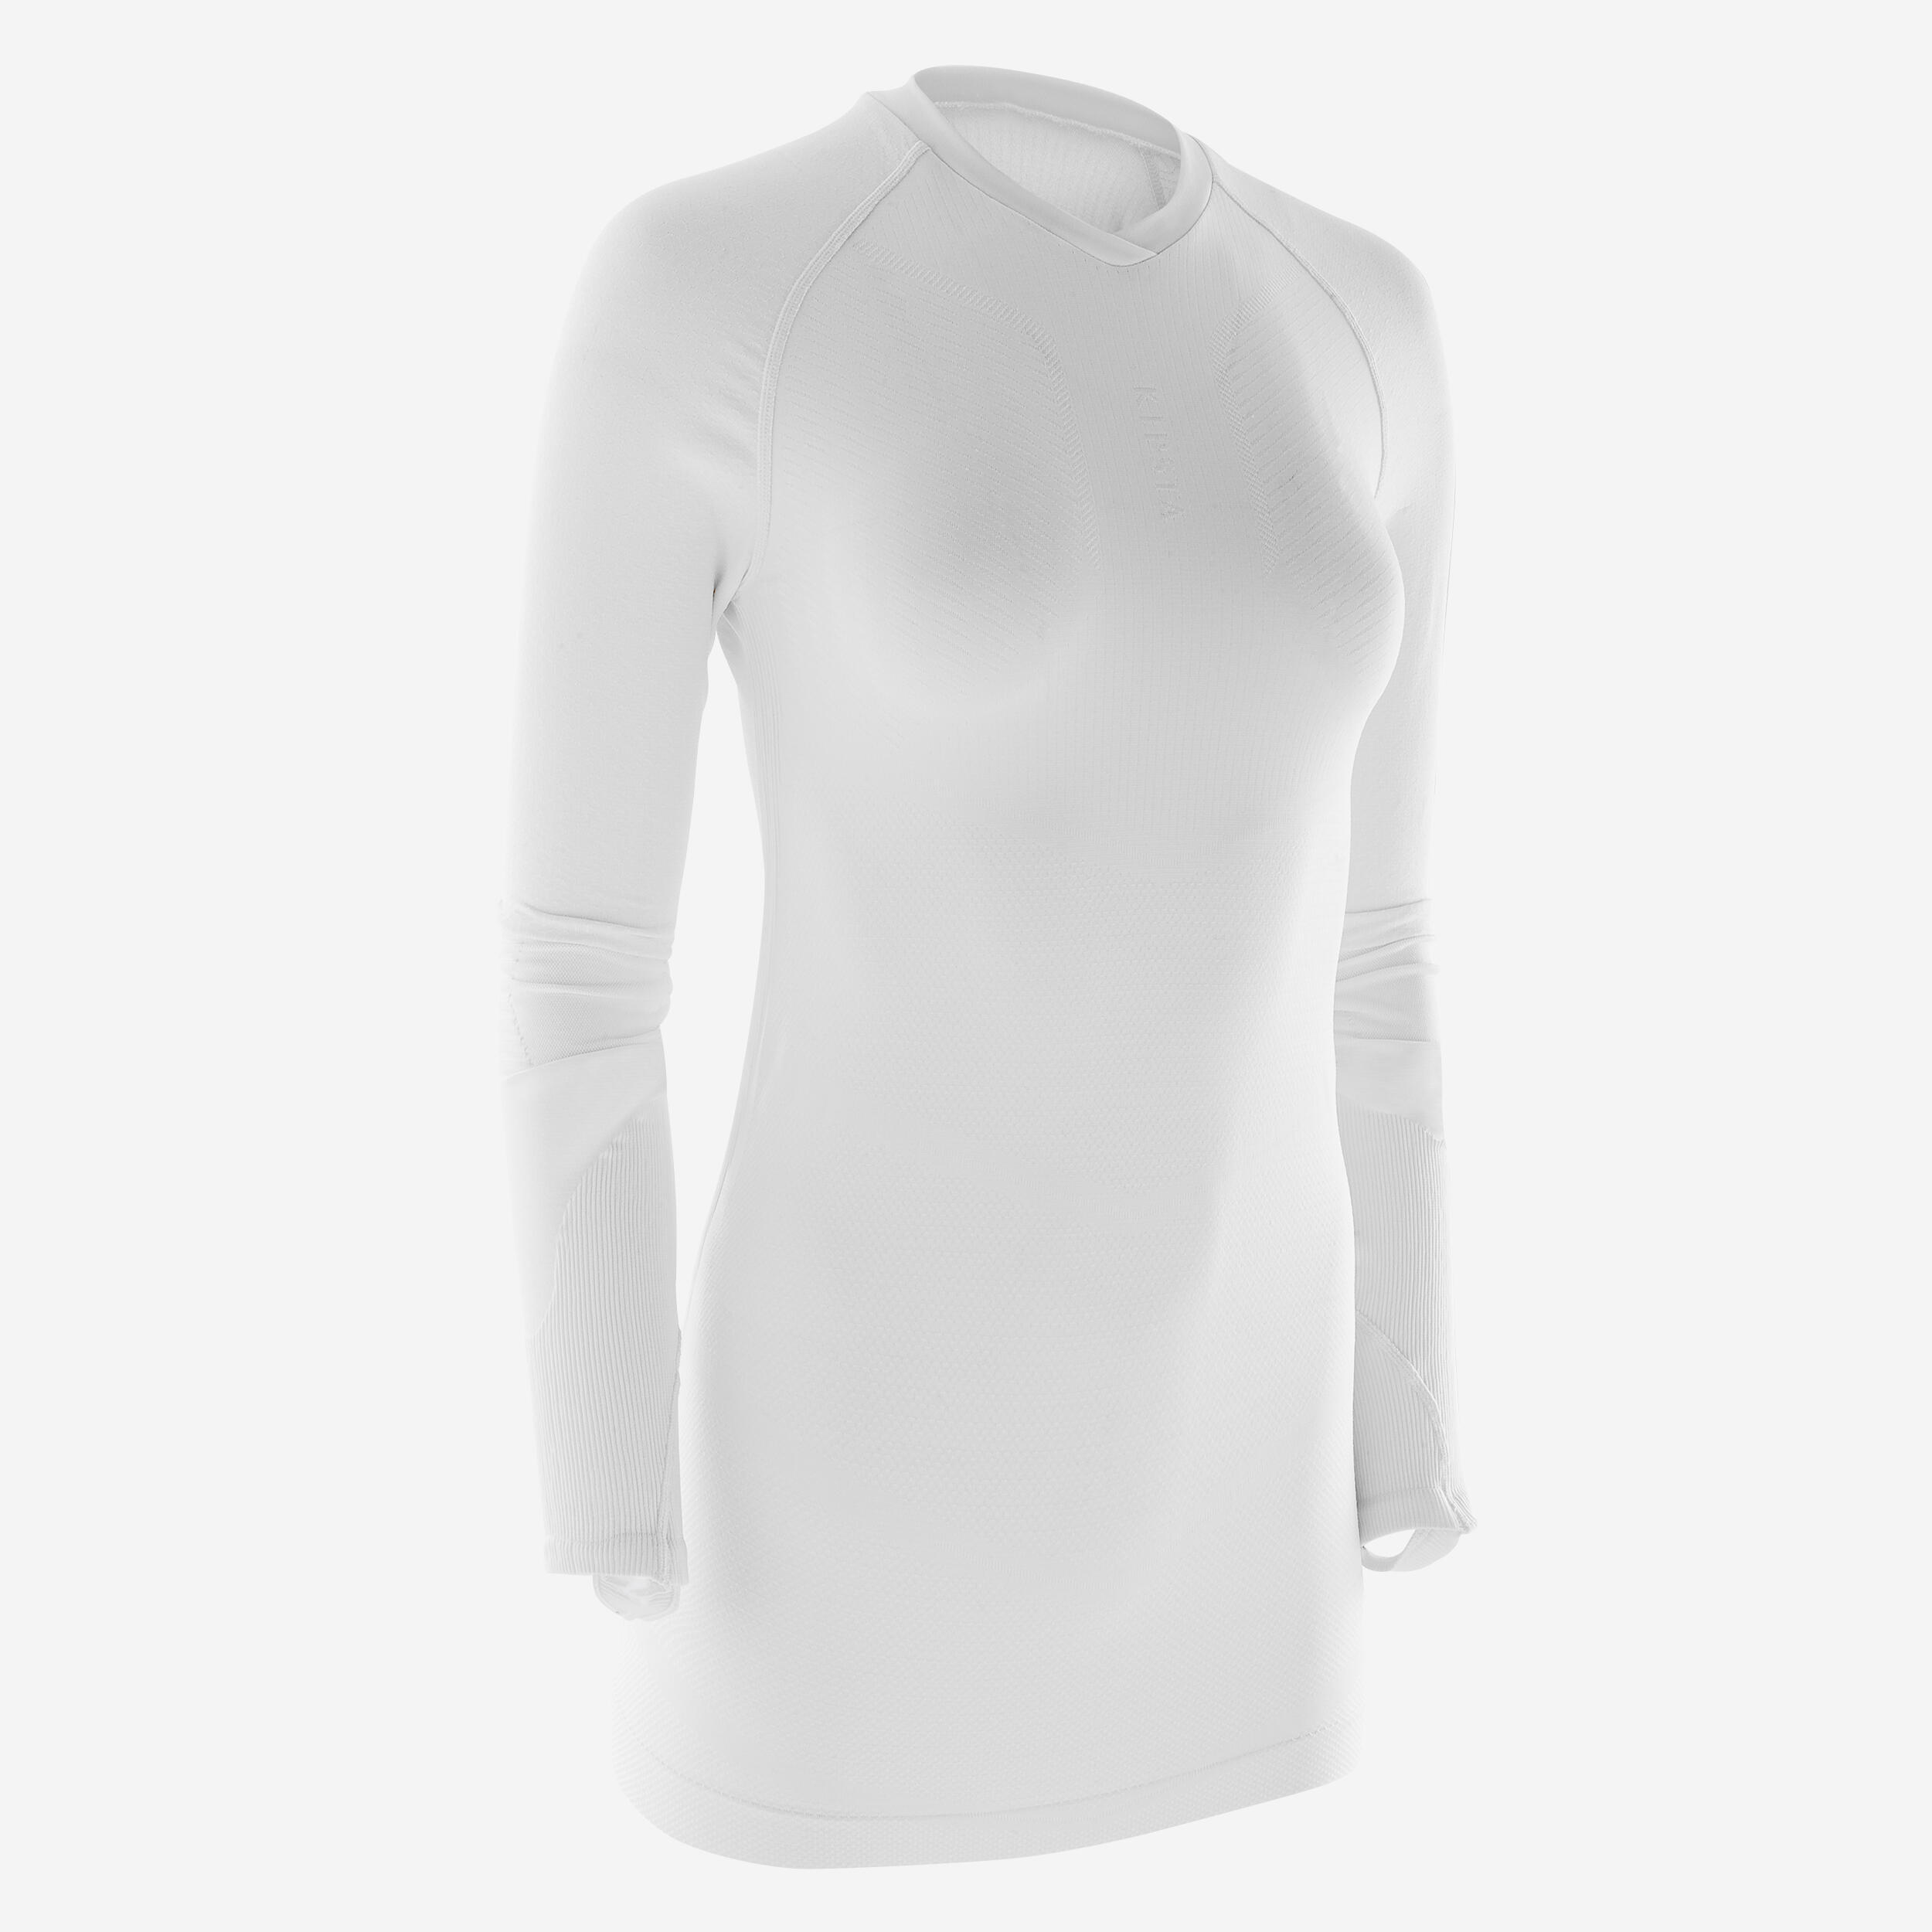 Adult Long-Sleeved Thermal Base Layer Top Keepdry 500 - White 2/13